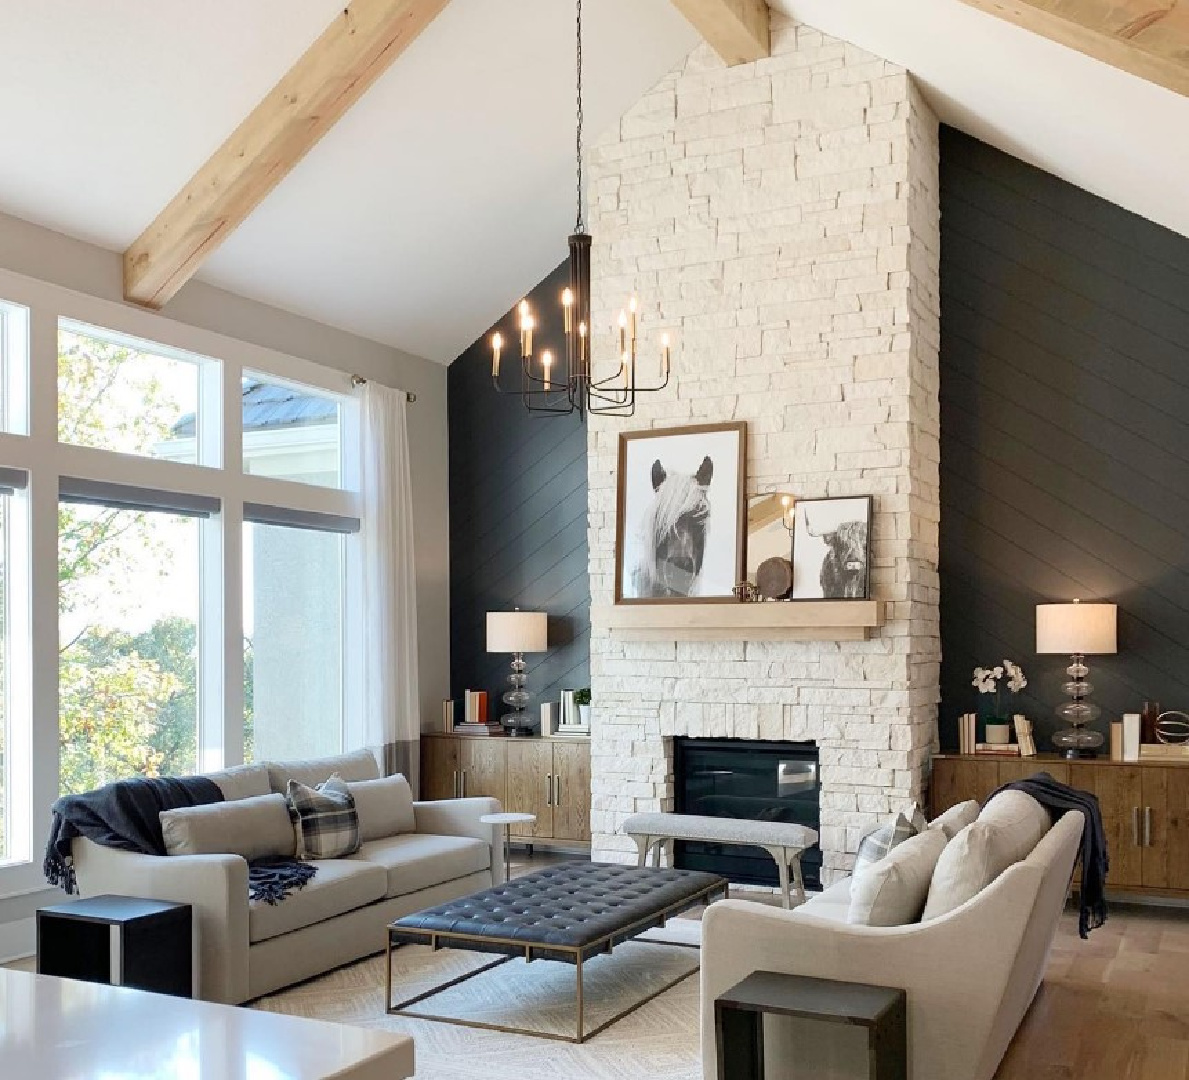 Iron Ore (Sherwin Williams) black on the shiplap flanking a stone fireplace in a beautiful modern rustic interior by @style.and.grace.interiors. #swironore #blackpaintcolors